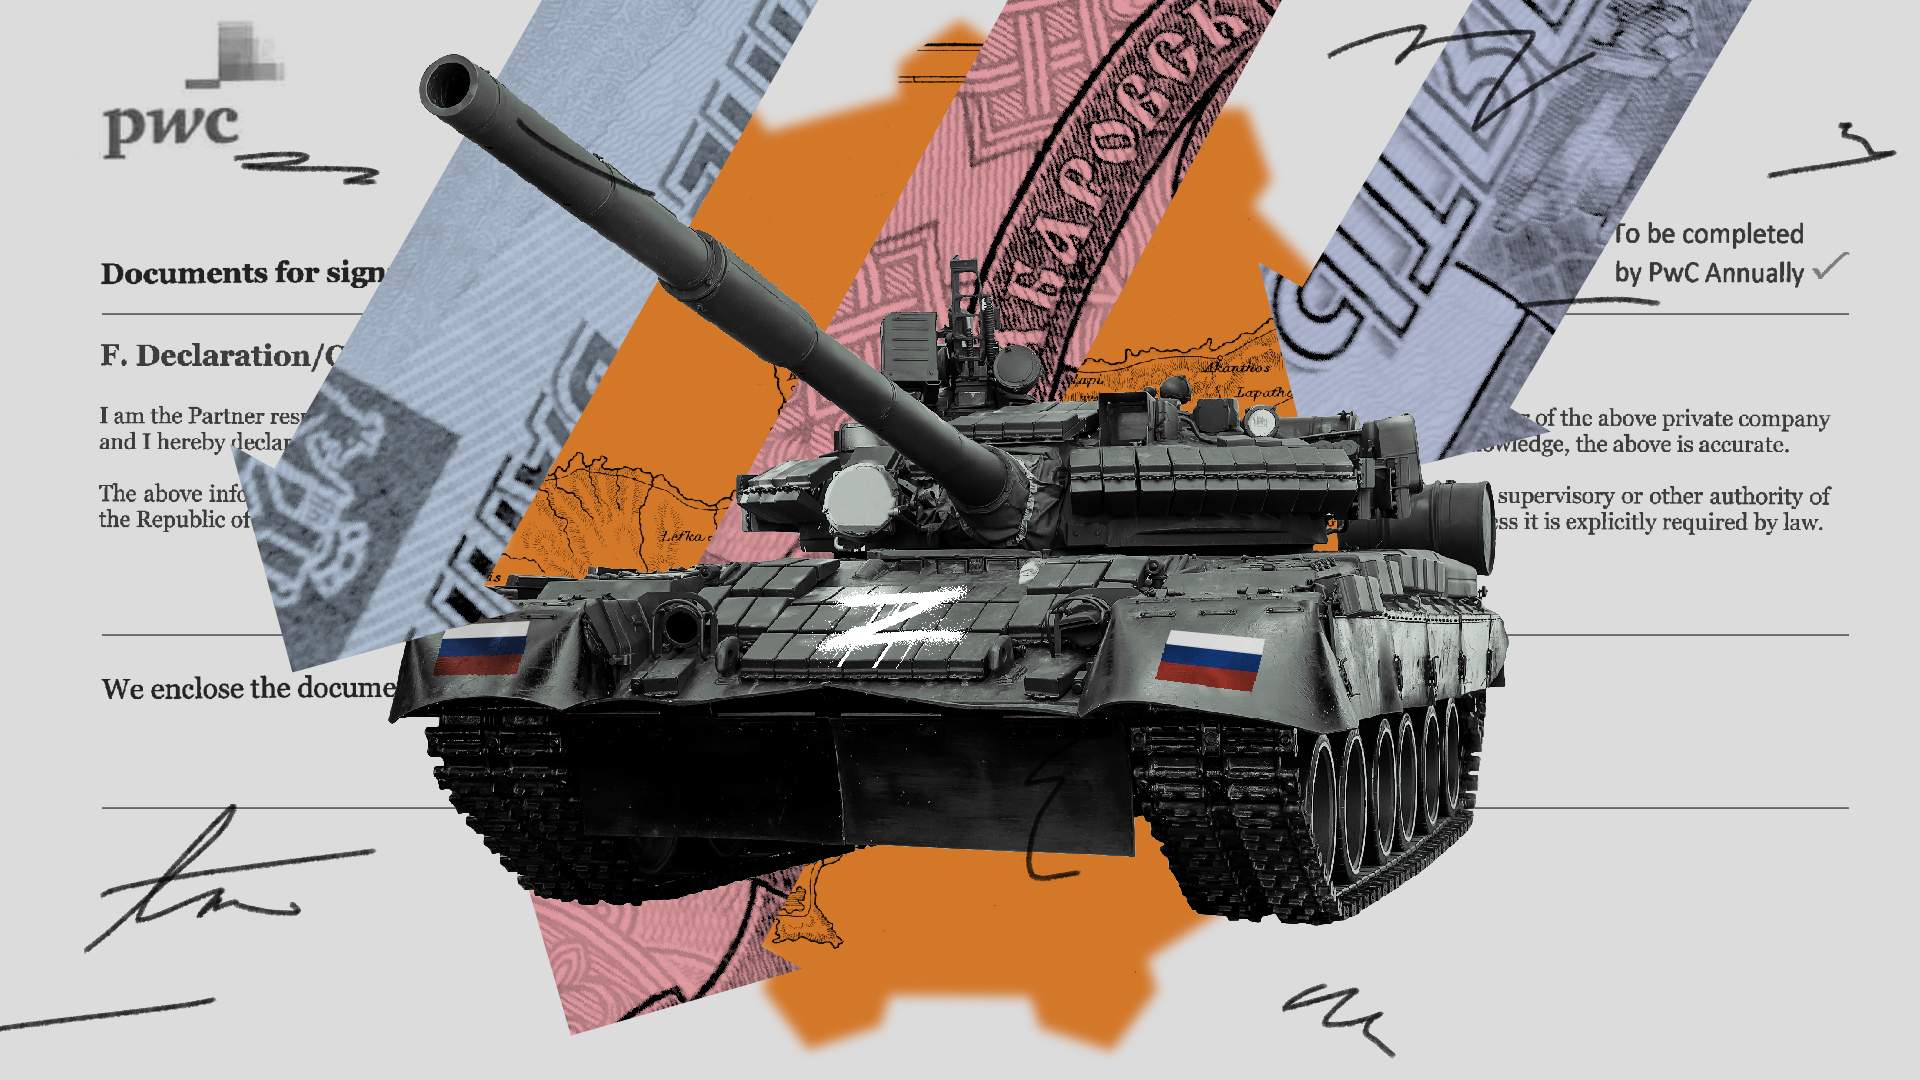 Photo illustration of a tank with Russian flag against a background of document and currency cut-outs